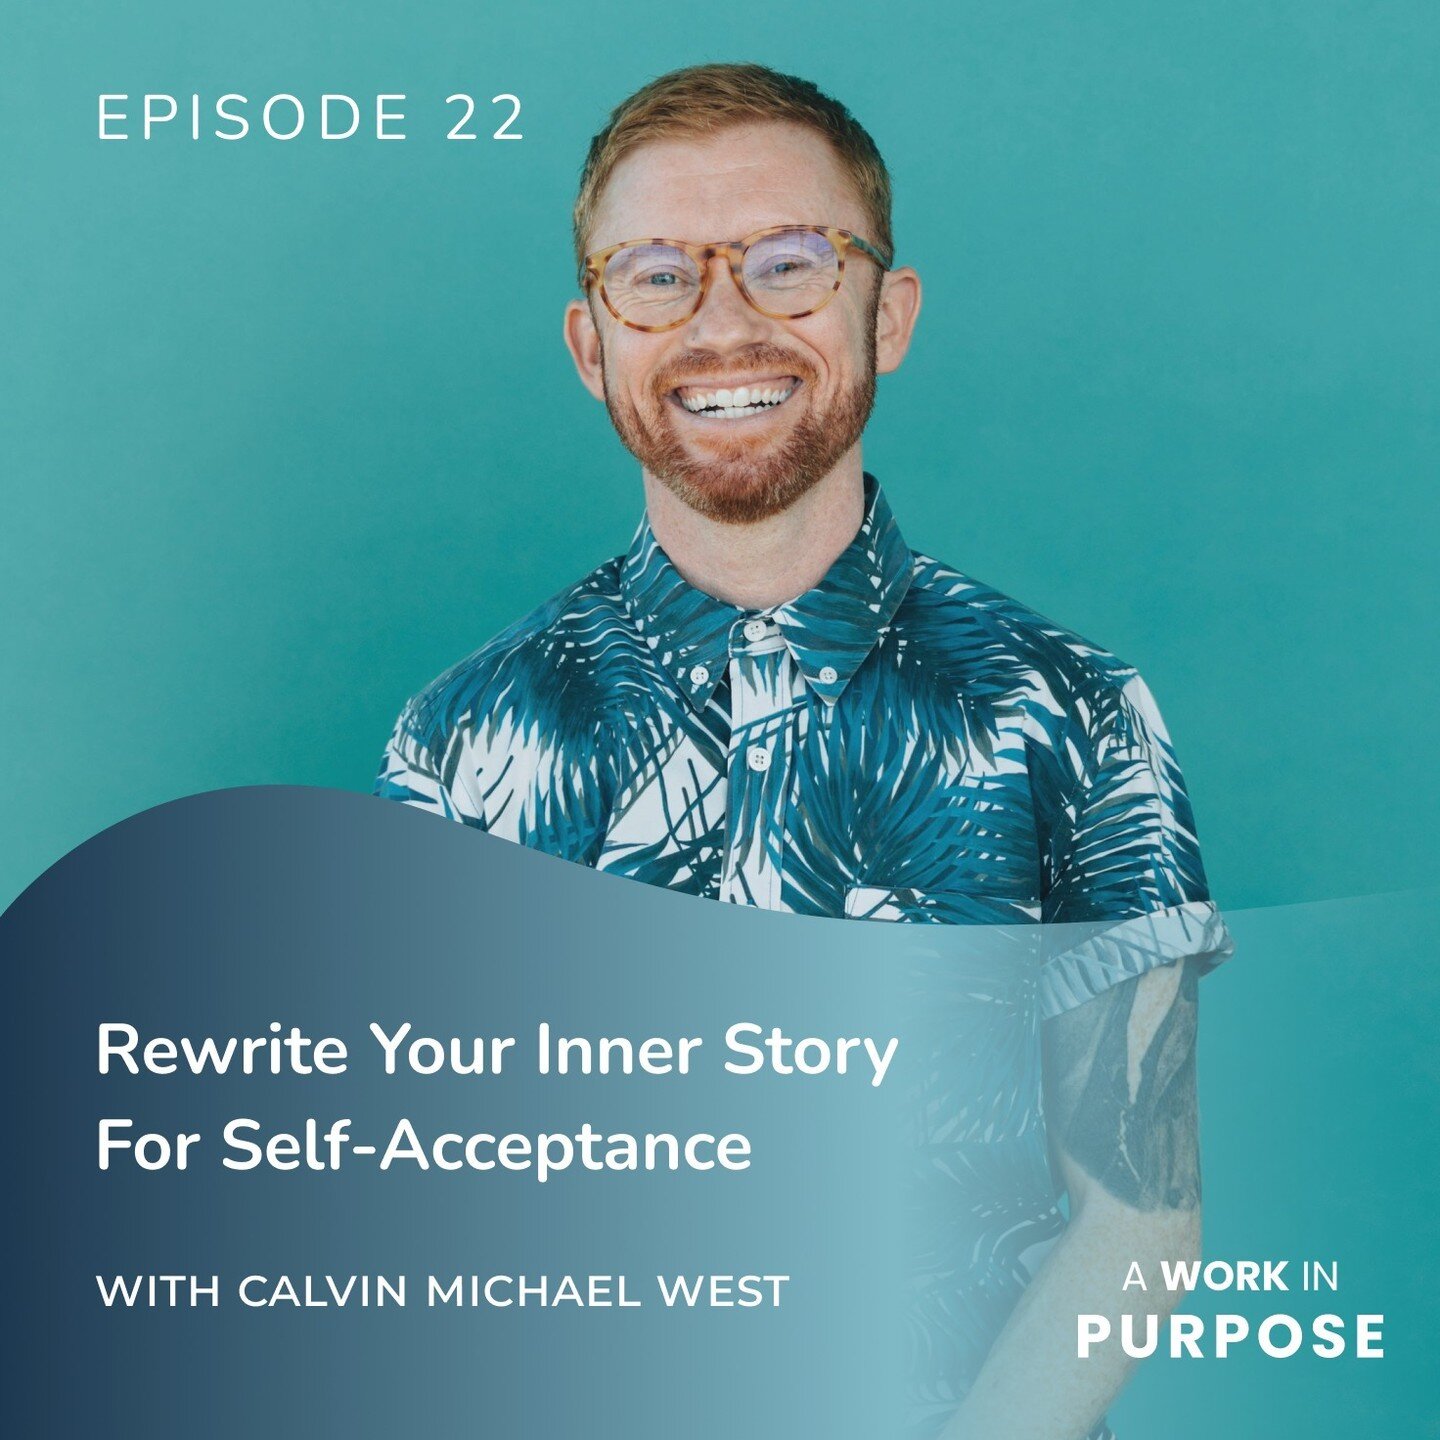 🔅 Here's your Sunday listen! ⁠
⁠
We all have an inner voice that repeats stories about ourselves over and over again. ⁠
⁠
But what should we do if our inner voice happens to be our biggest bully? Constantly keeping us down. ⁠
⁠
How can we loosen its